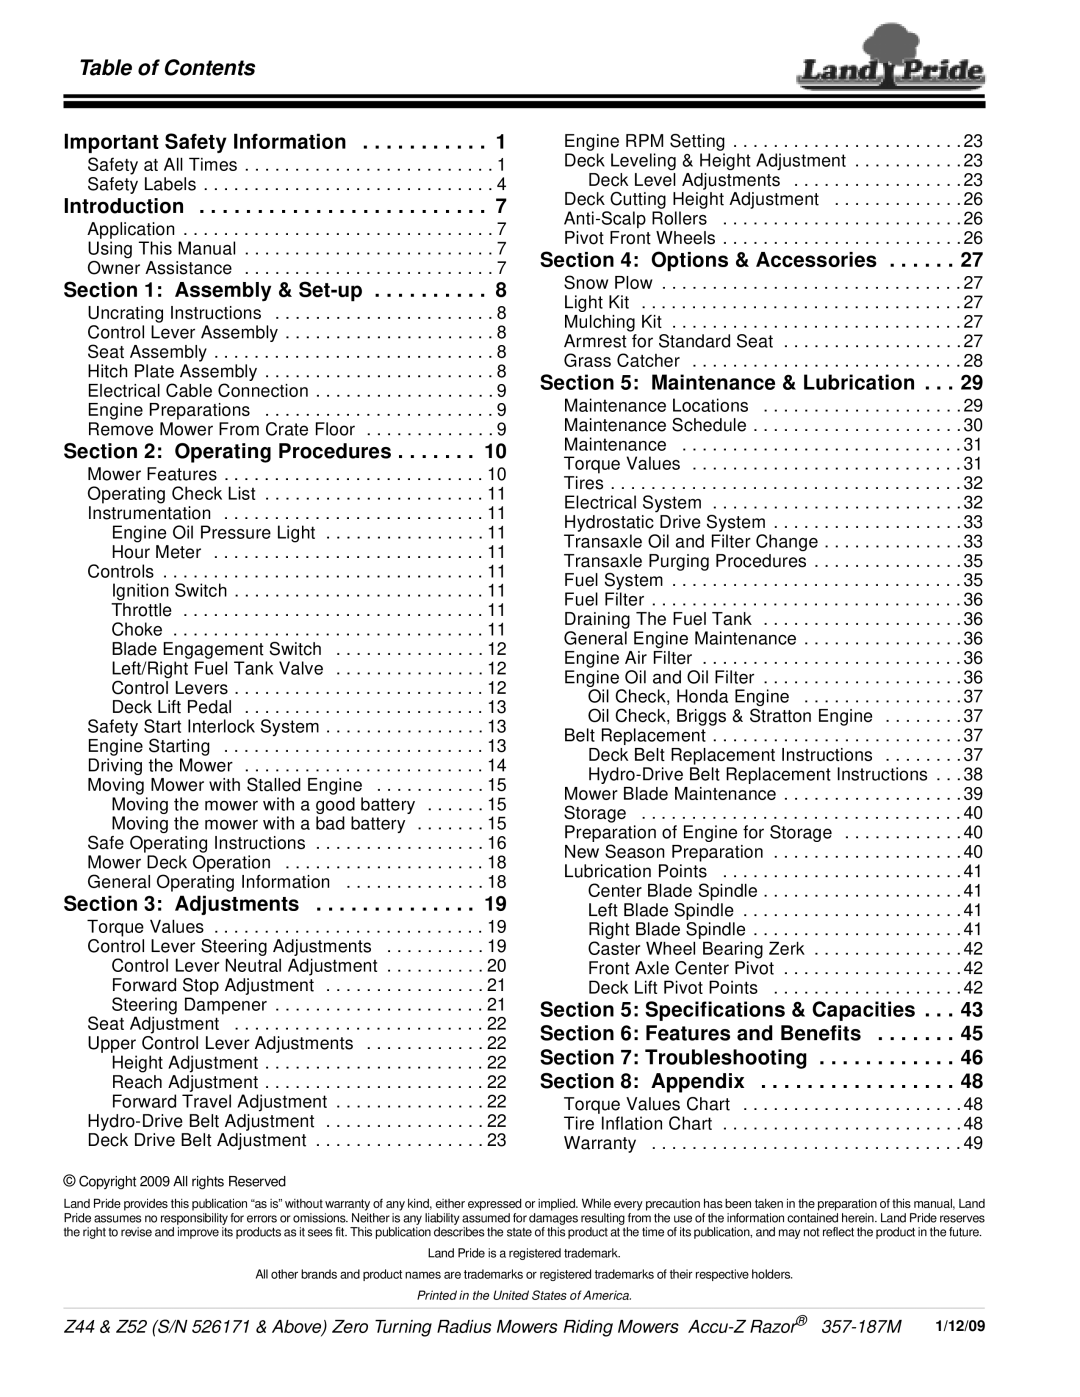 Land Pride 357-187M Table of Contents, Important Safety Information, Introduction, Assembly & Set-up, Operating Procedures 